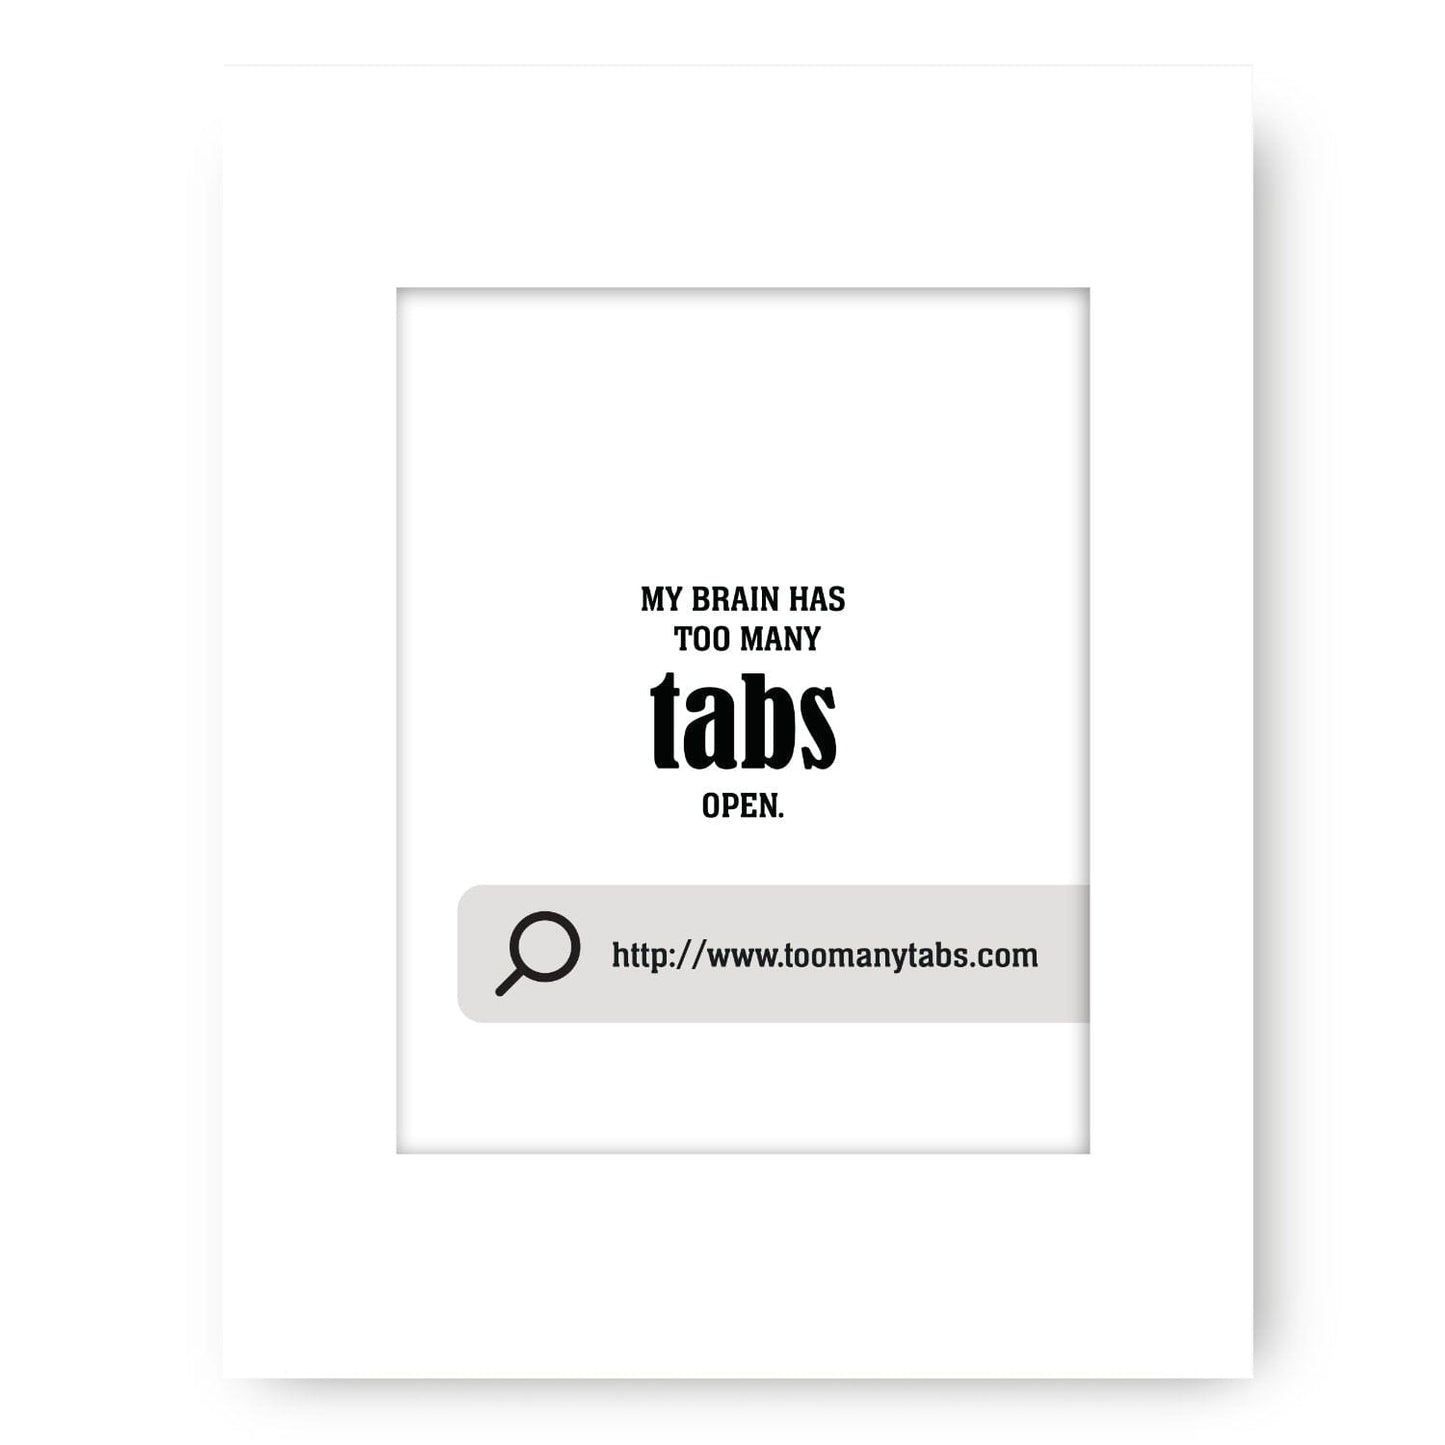 My Brain Has Too Many Tabs Open - Wise and Witty Wall Art Wise and Wiseass Quotes Song Lyrics Art 8x10 White Matted Print 